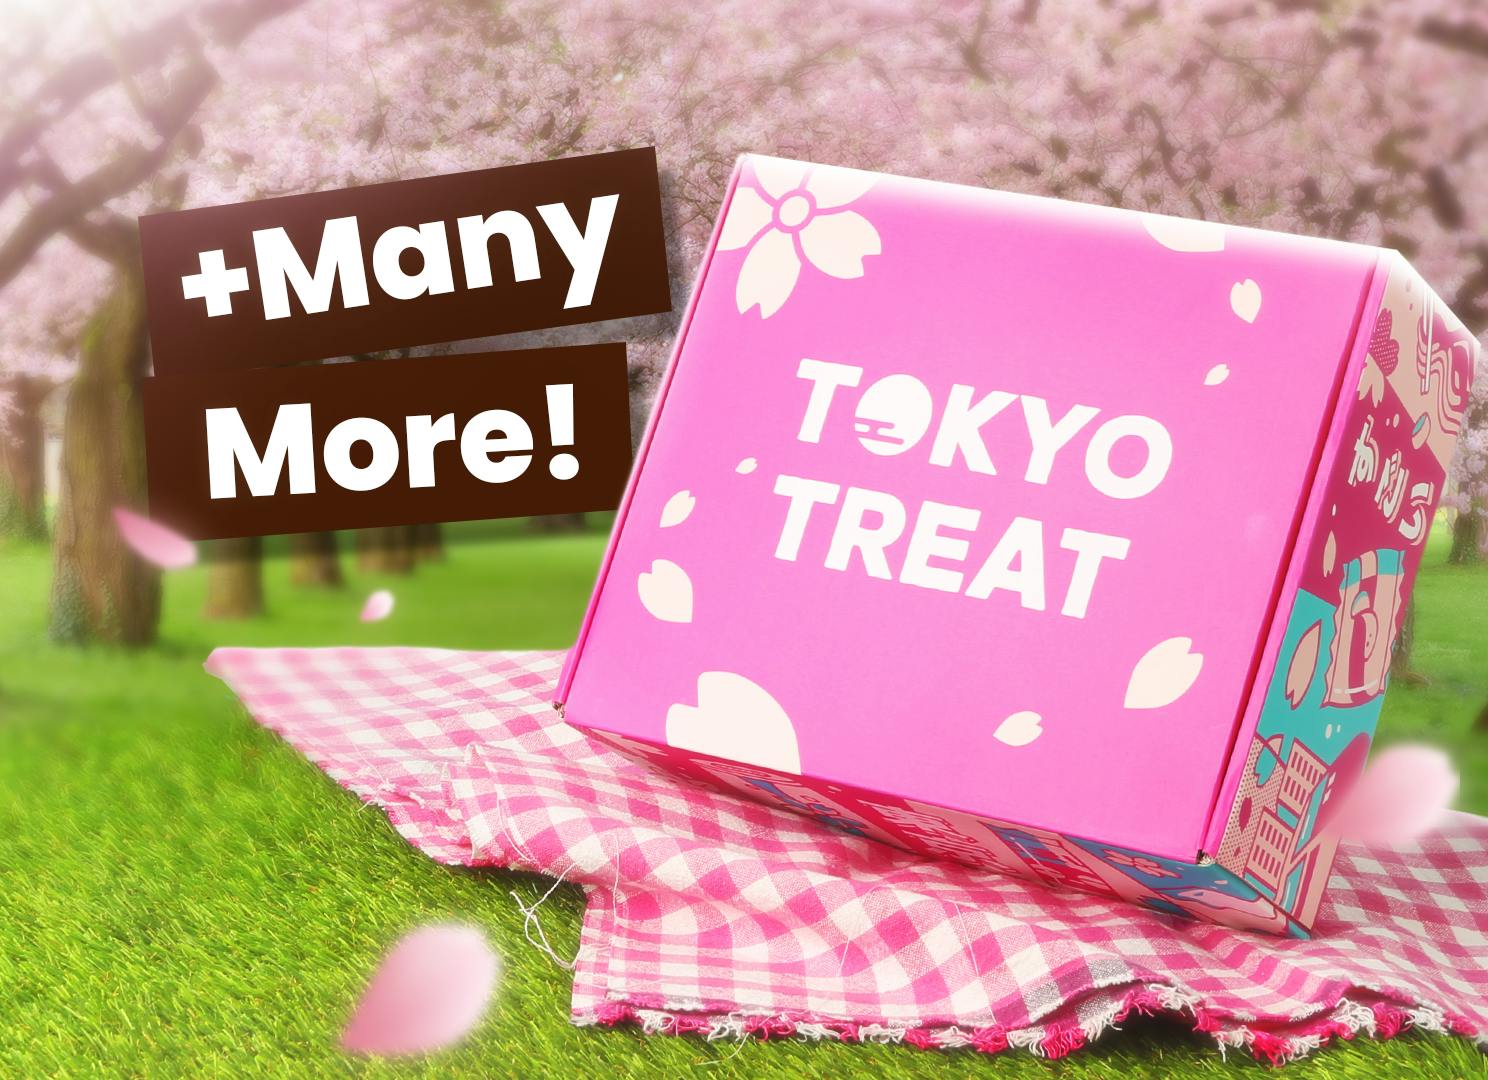 The TokyoTreat box is displayed under the cherry blossoms on a picnic blanket